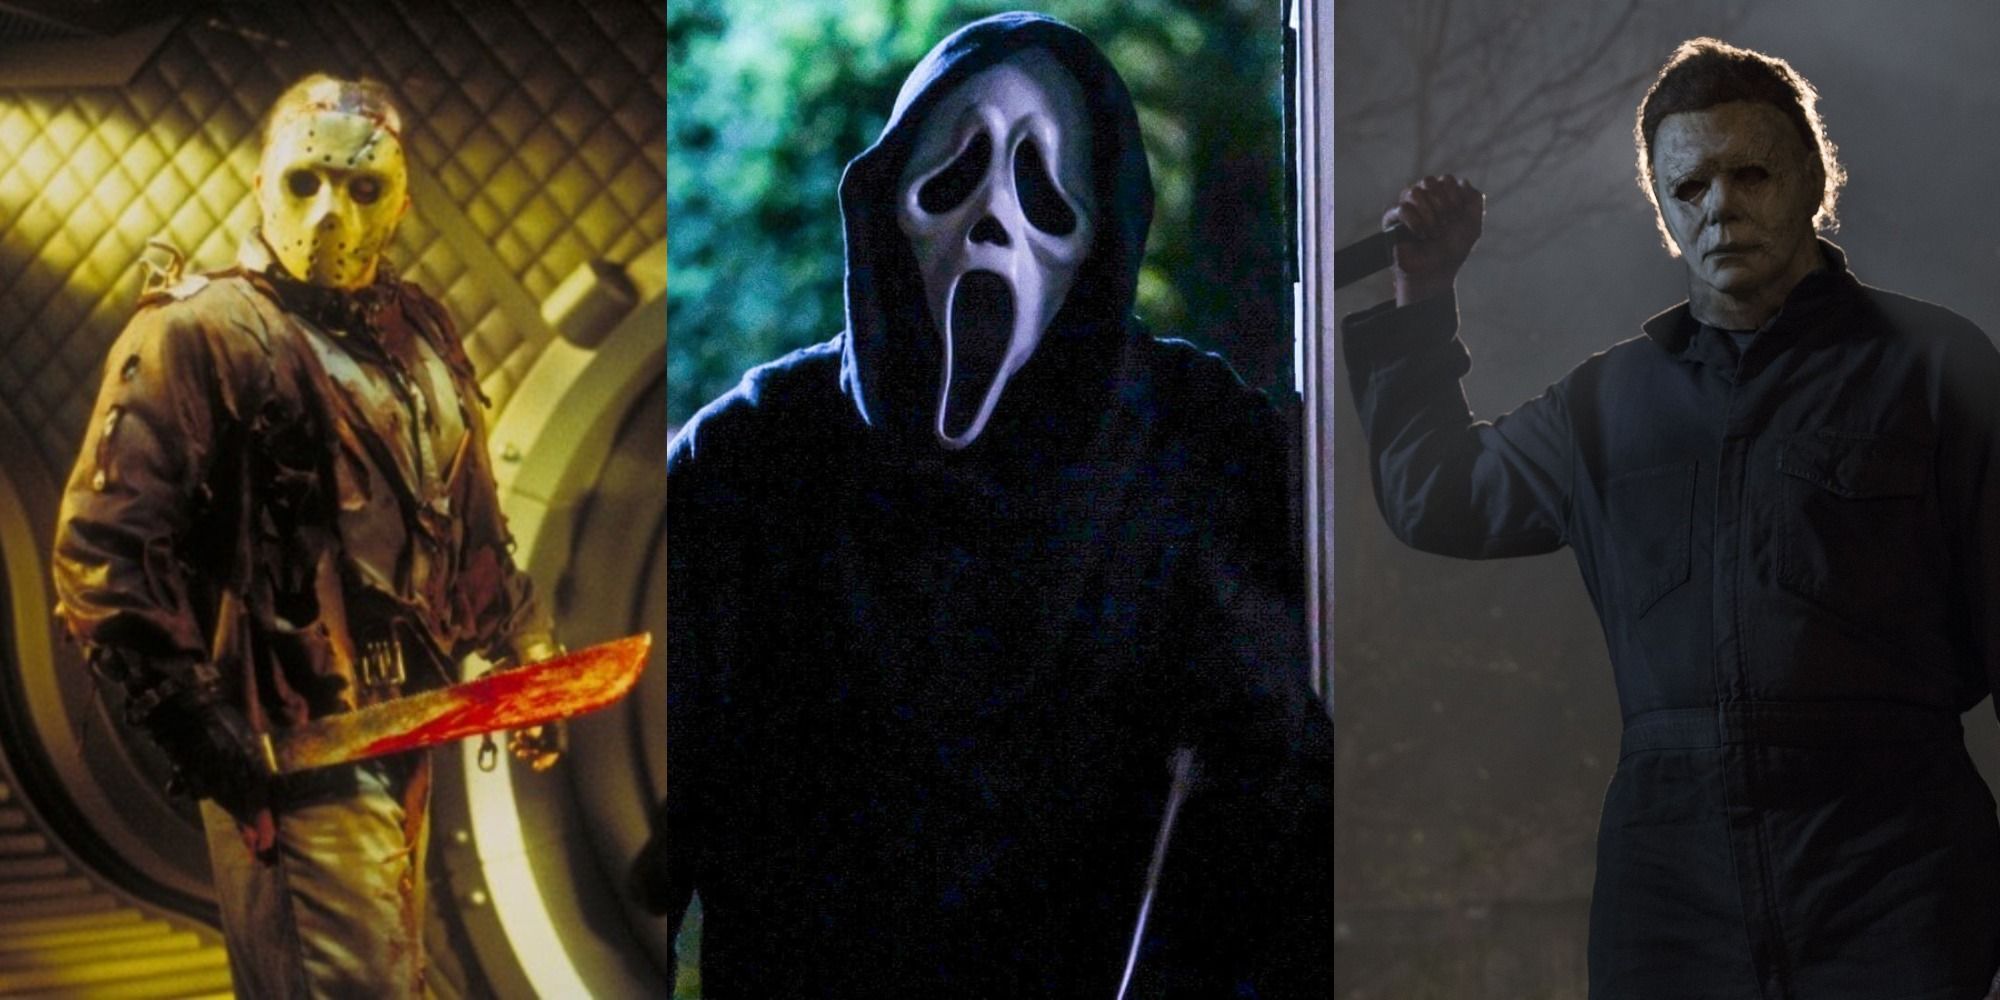 Split image of Jason with his machete, Ghostface in the doorway, and Michael Myers with his knife